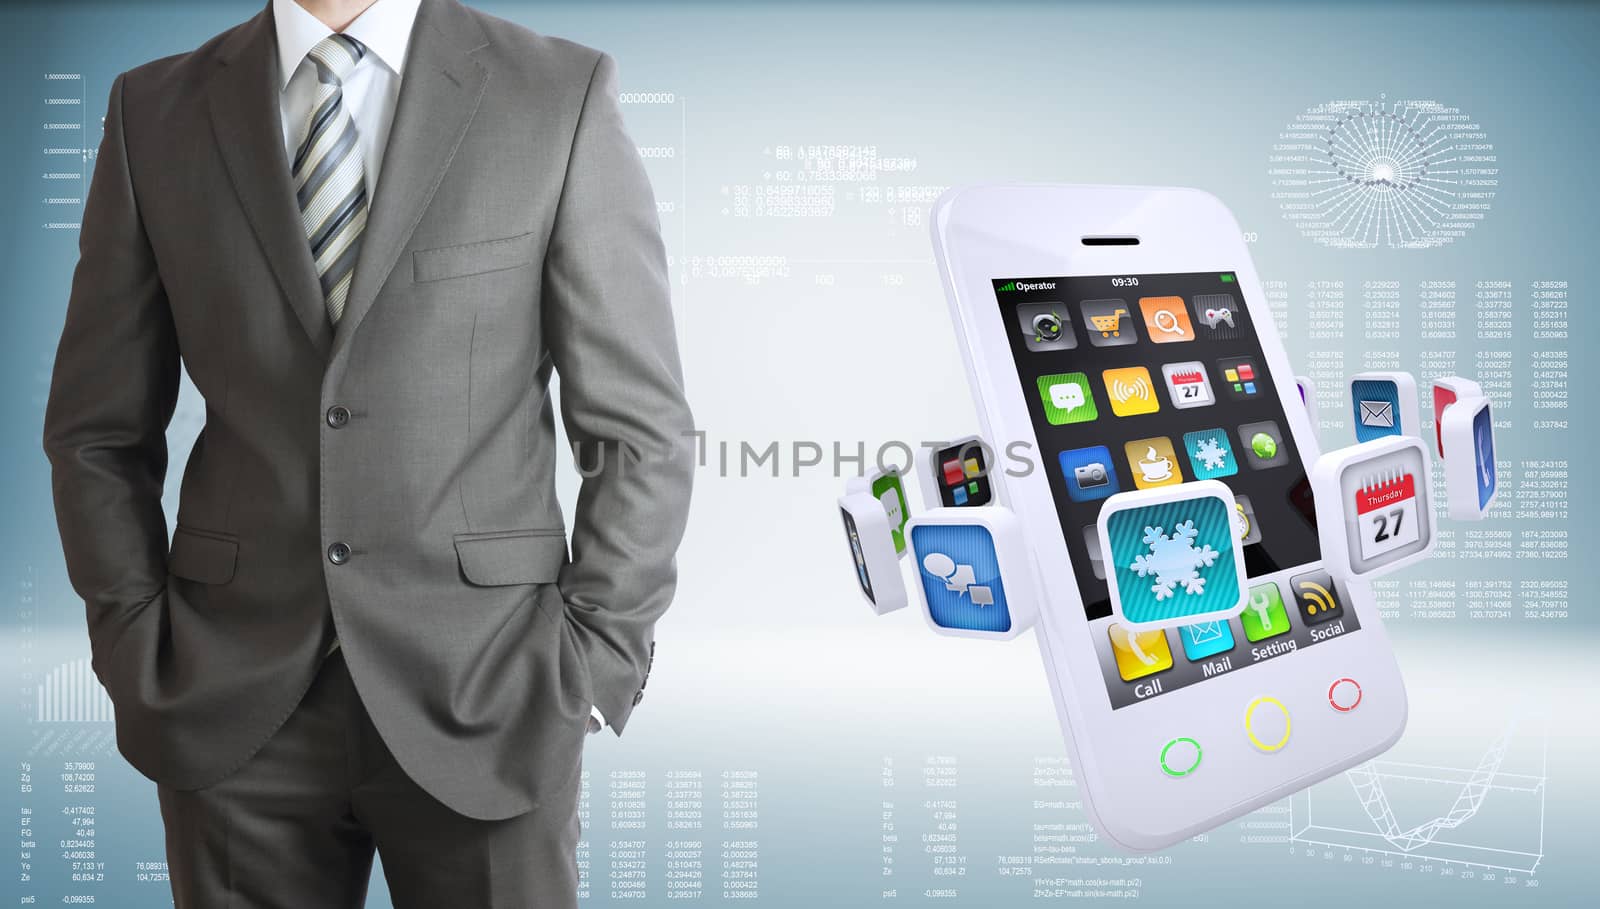 Businessman in suit. Smartphones with colorful apps as backdrop